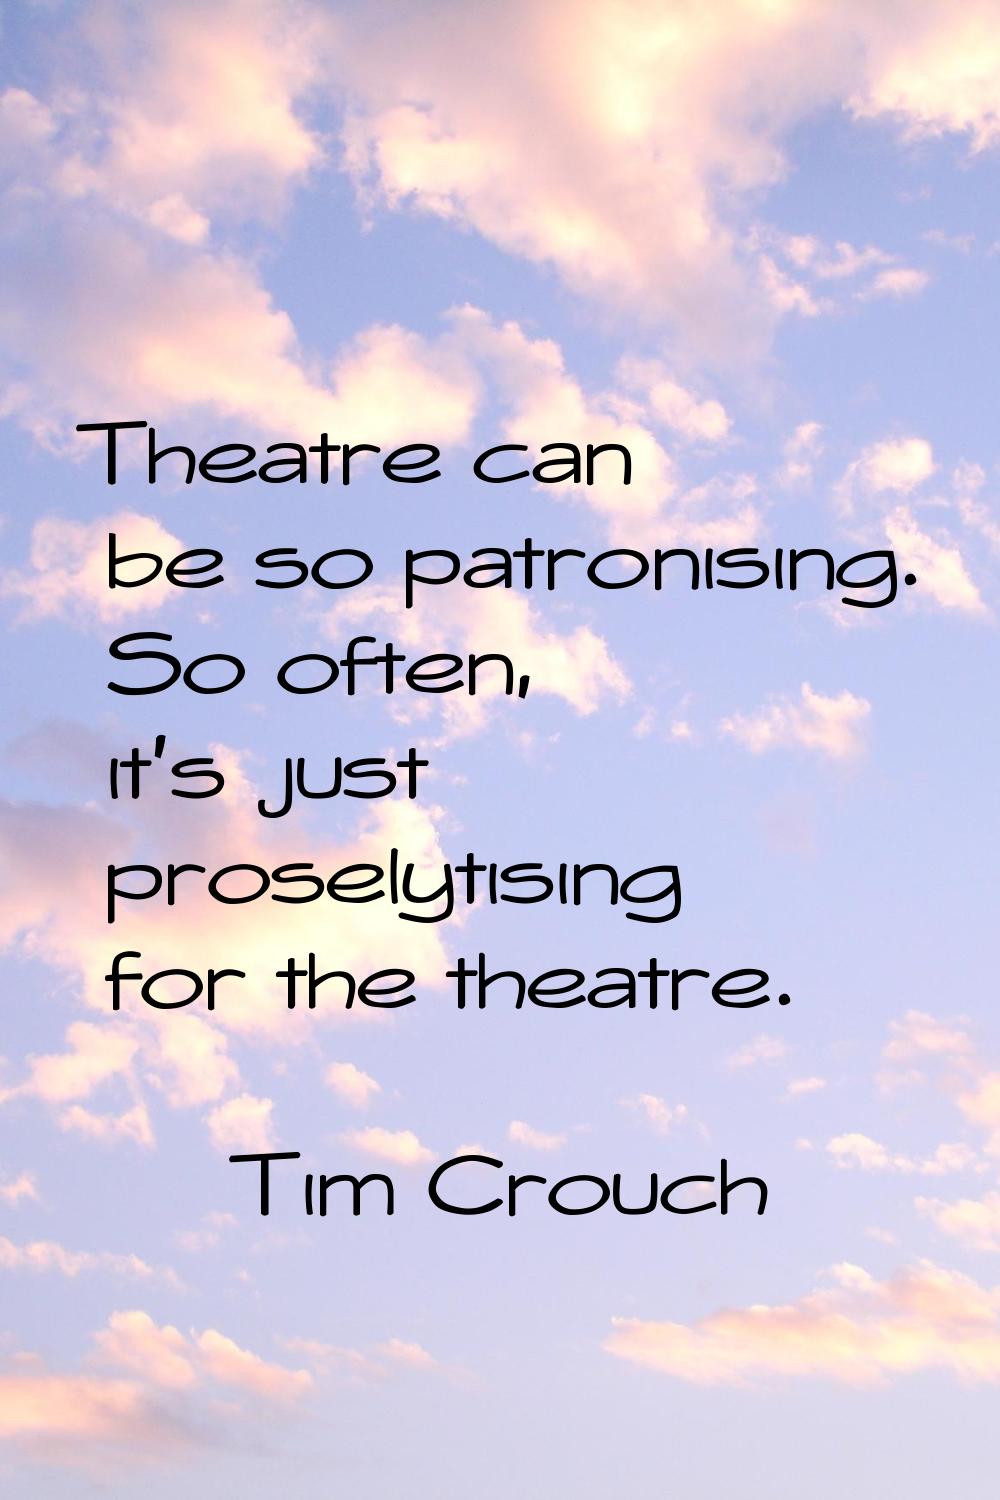 Theatre can be so patronising. So often, it's just proselytising for the theatre.